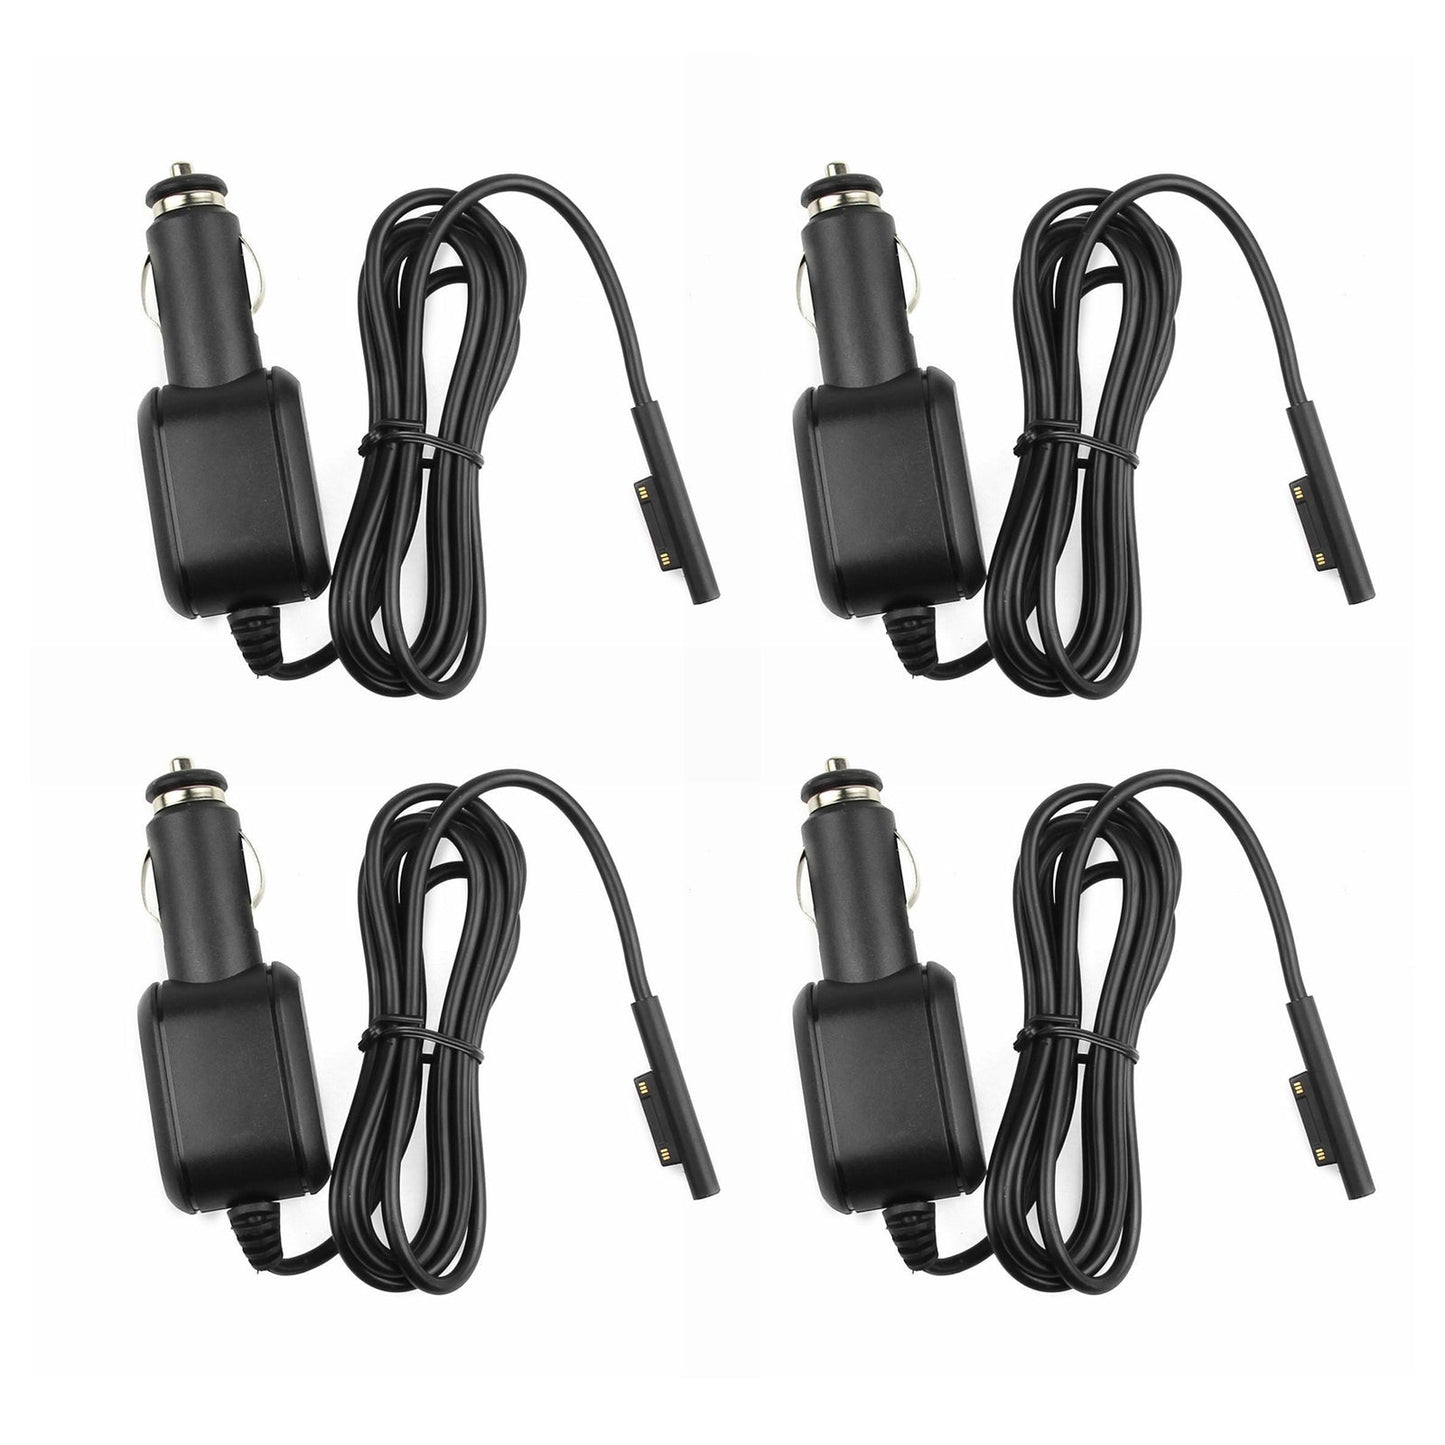 12V Car Charger Cigarette Power Supply Adapter For Microsoft Surface Pro 4/Pro 3